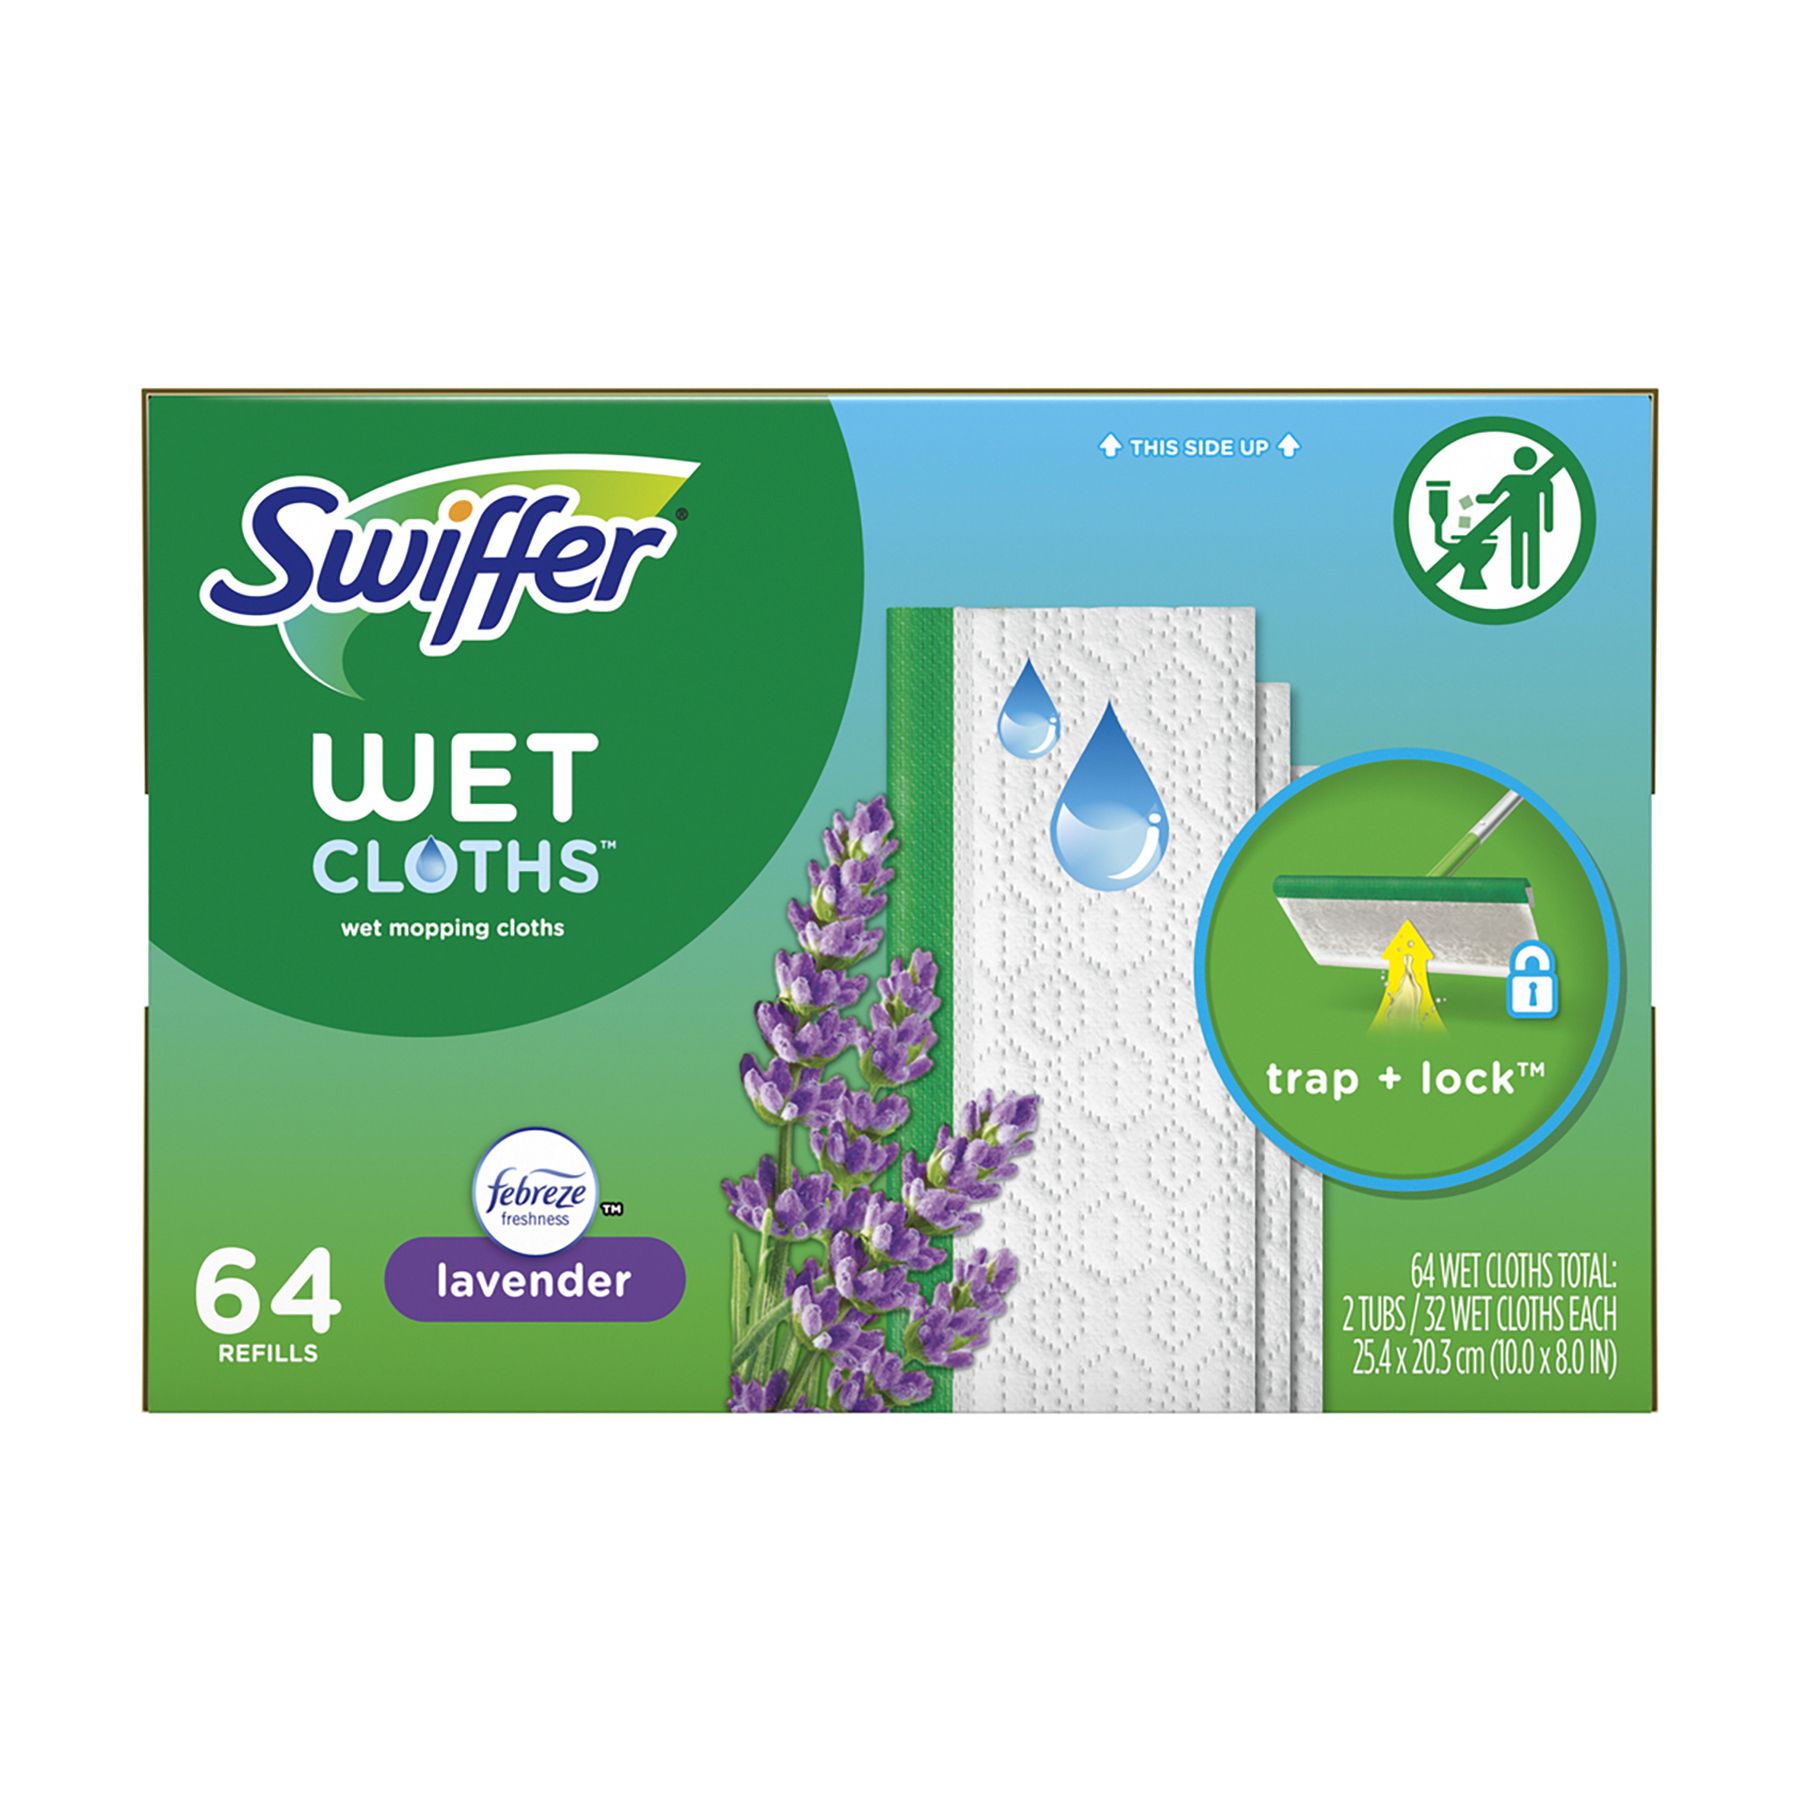 Swiffer 180 Duster Multi-Surface Refills with Febreze Lavender